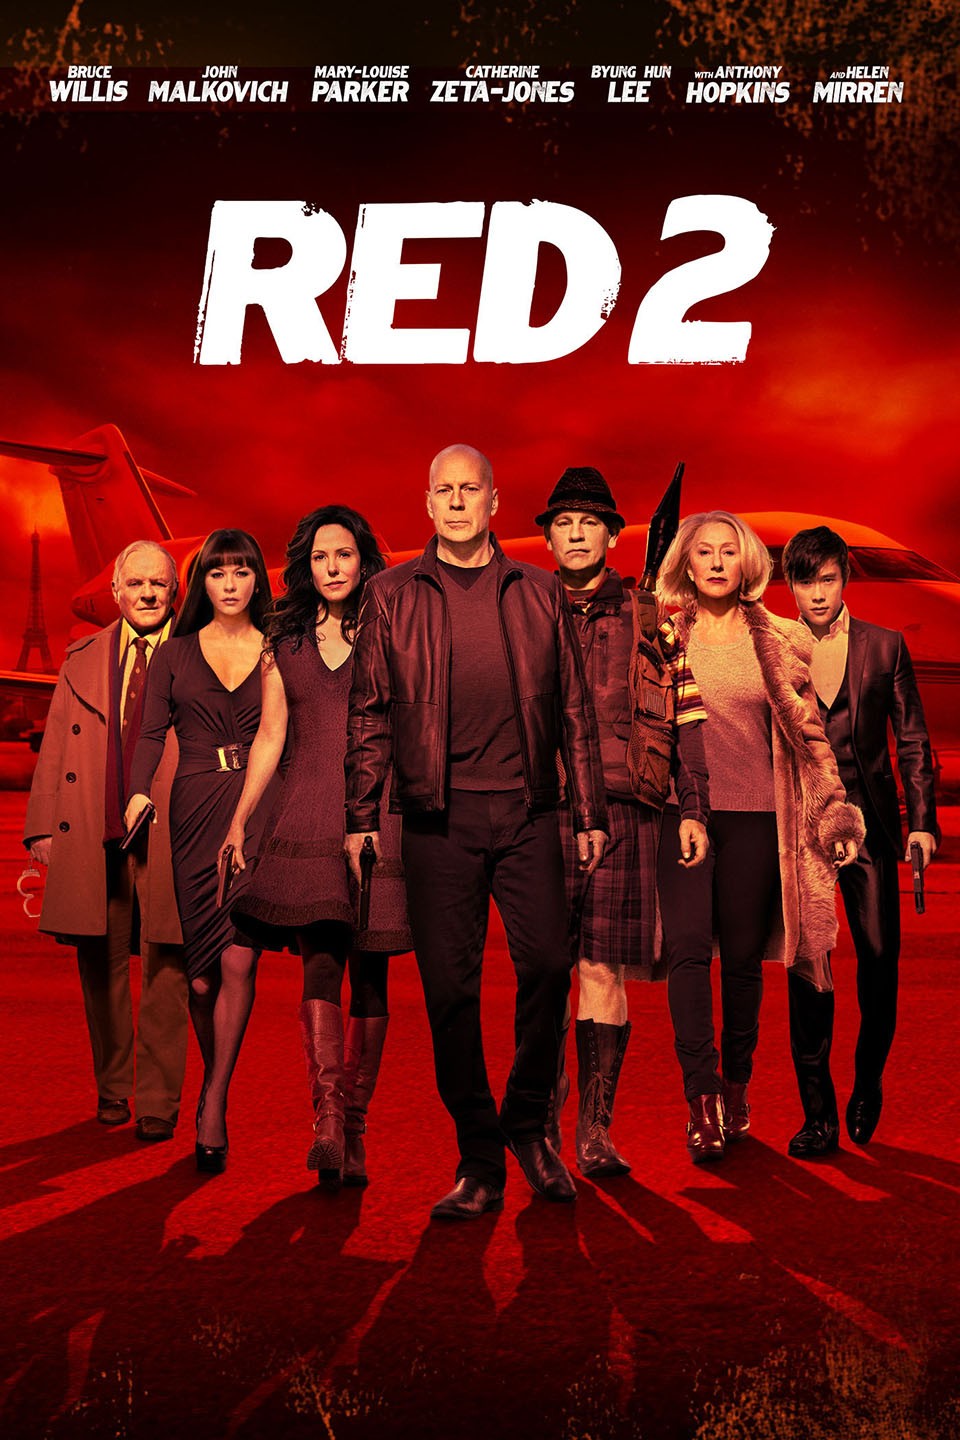 Red 2' Review